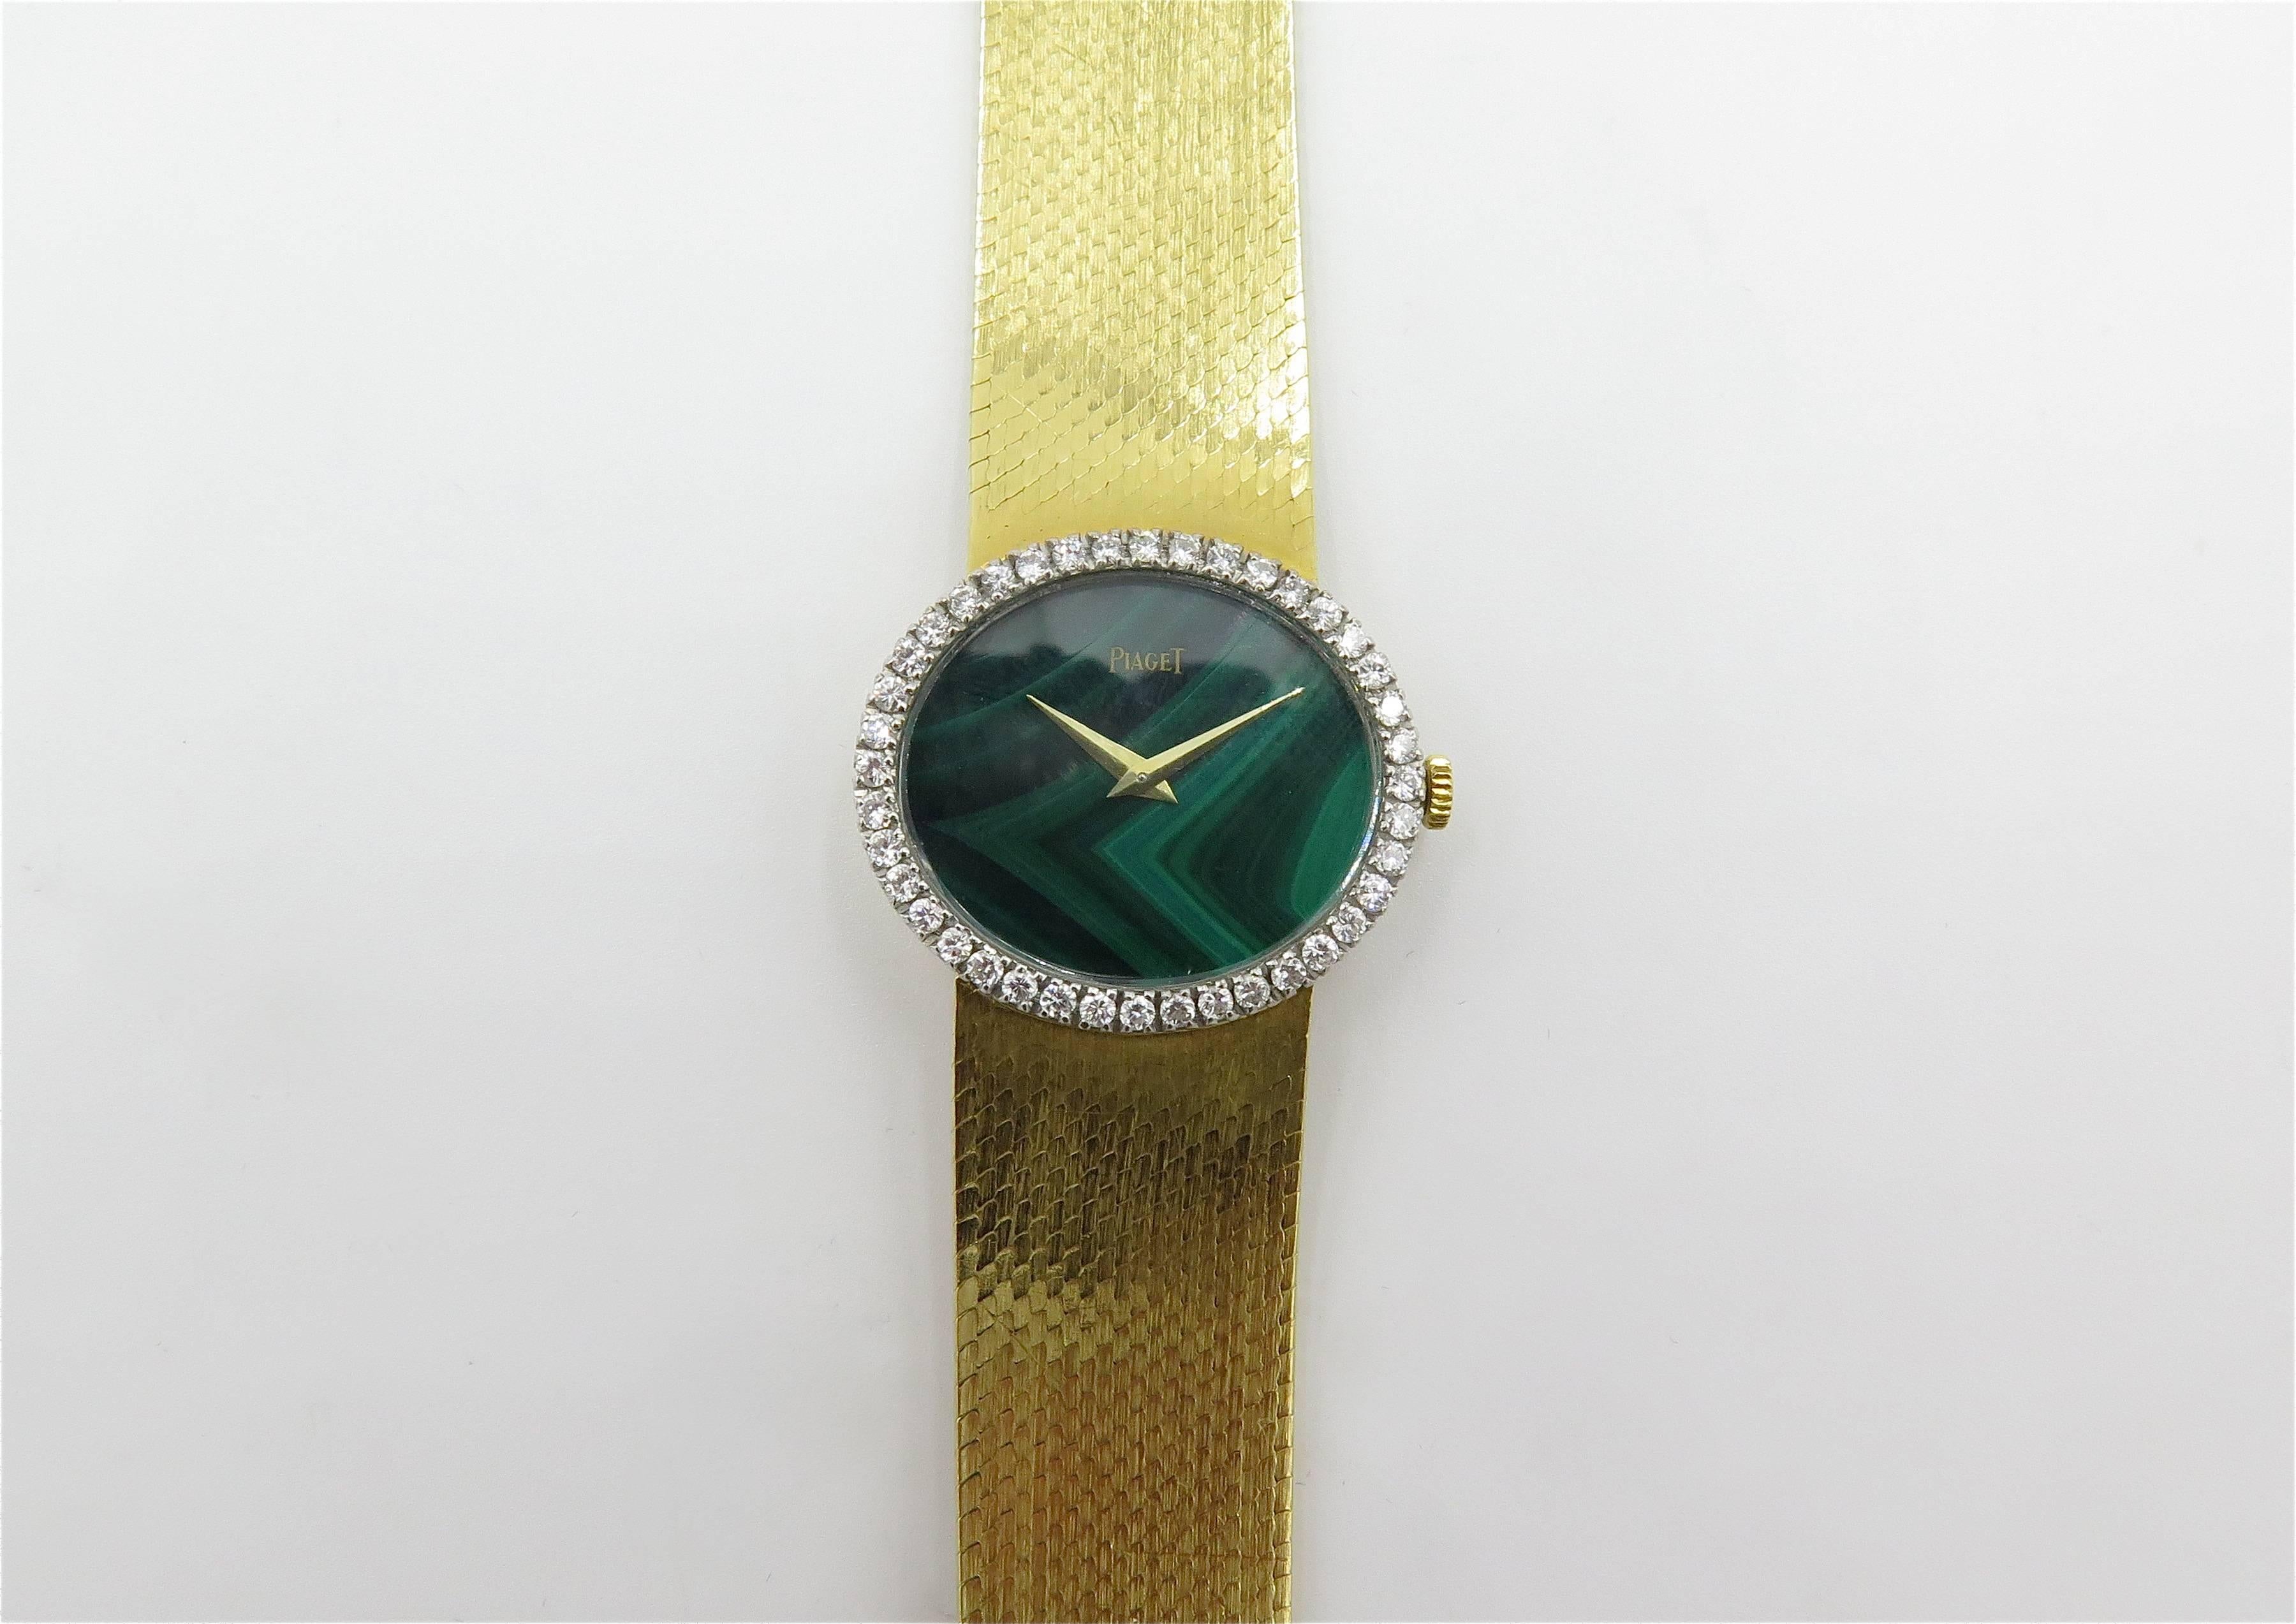 An 18 karat yellow gold, malachite and diamond watch. Piaget. Circa 1970. Of mechanical movement. The oval malachite dial with gold hands, within a circular cut diamond bezel, joined by a Gold bracelet. Forty (40) diamonds weigh approximately 1.00